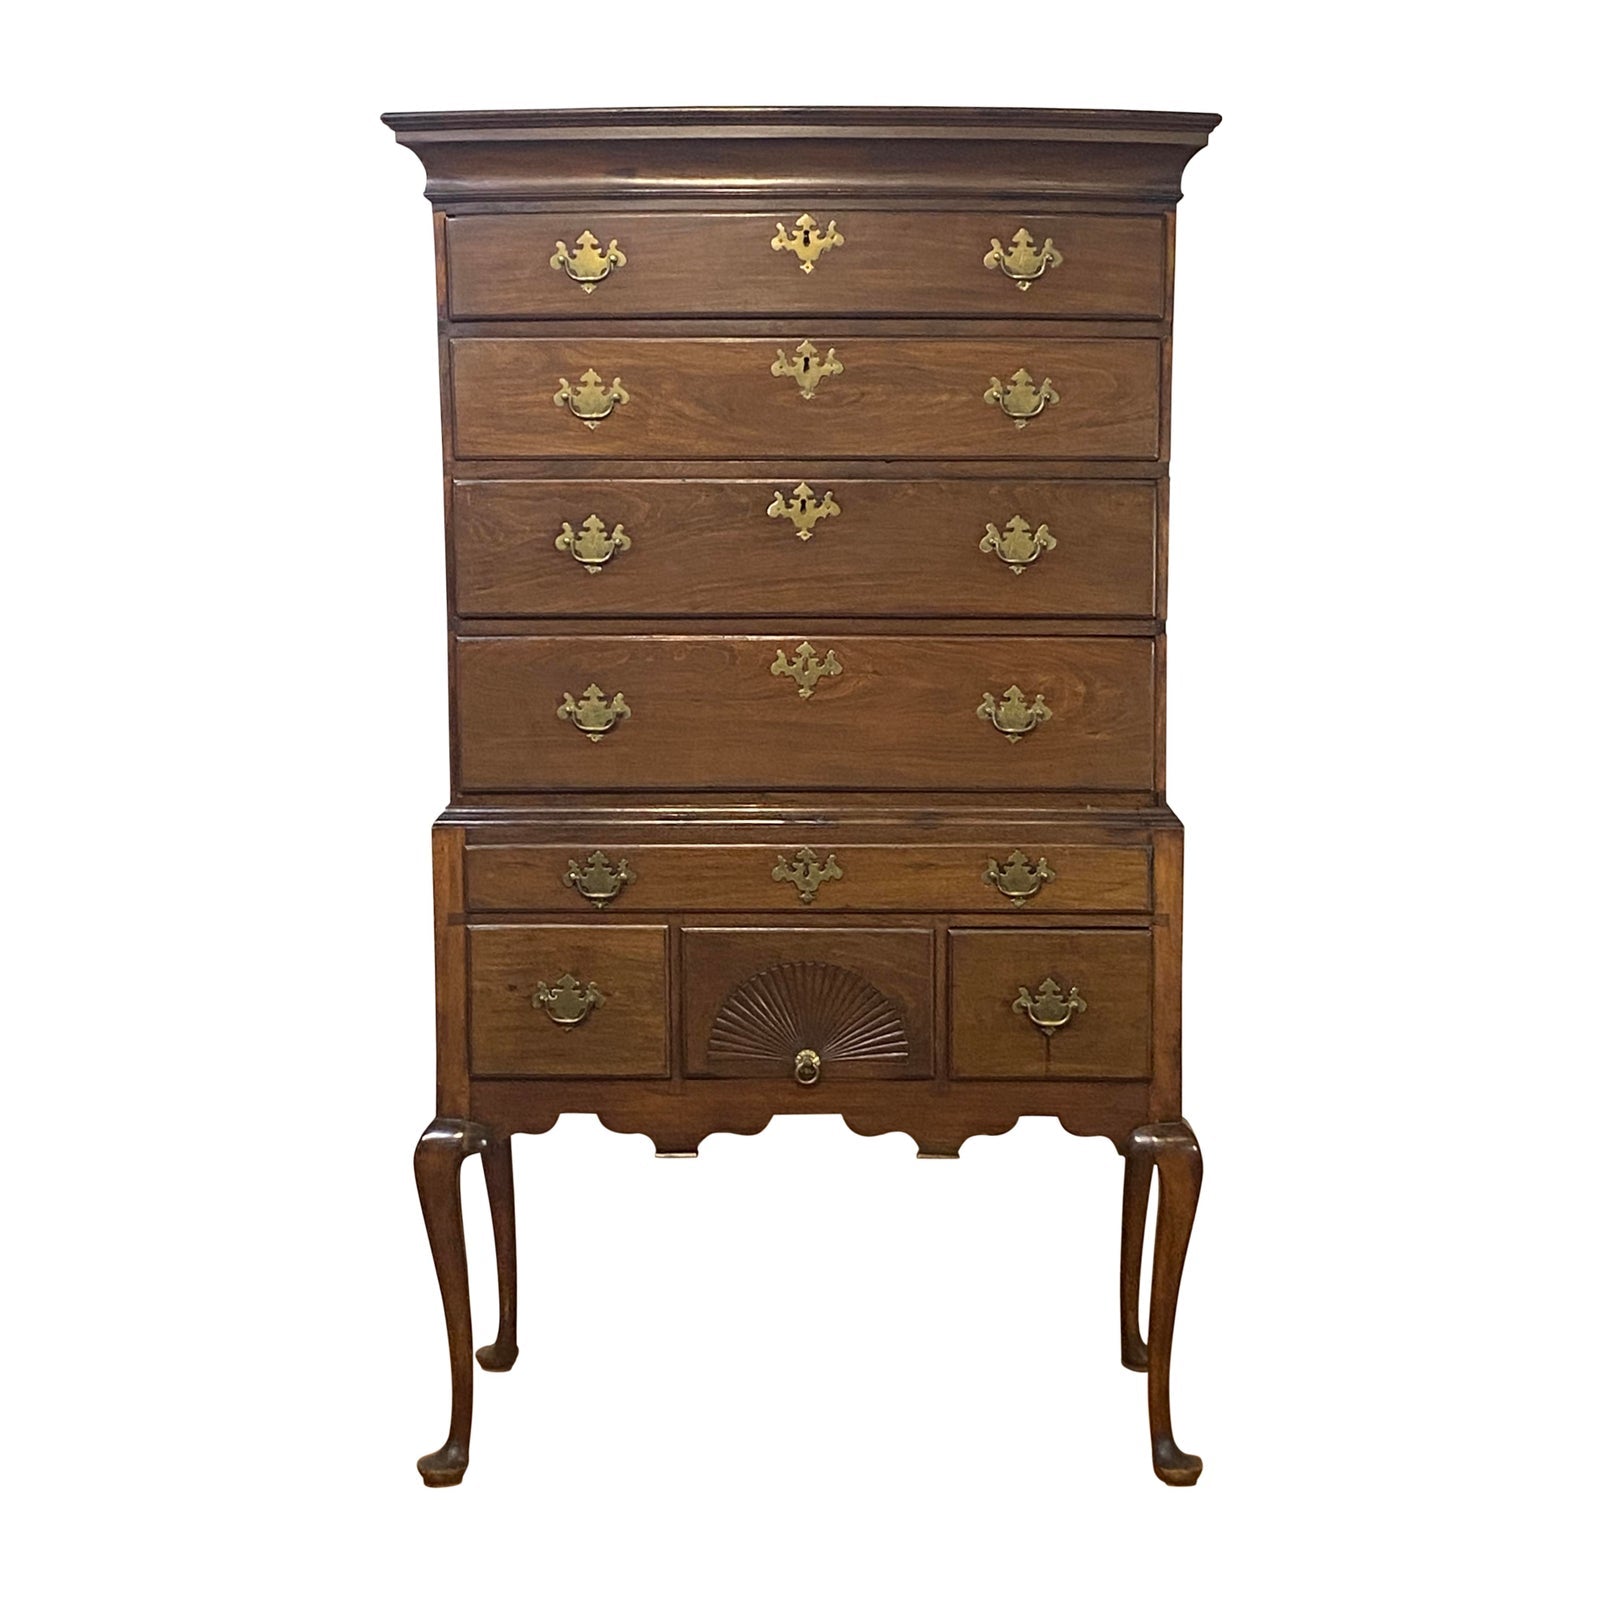 Antique Queen Anne Walnut Highboy circa 1765 made in the United States (18th century American furniture for sale).